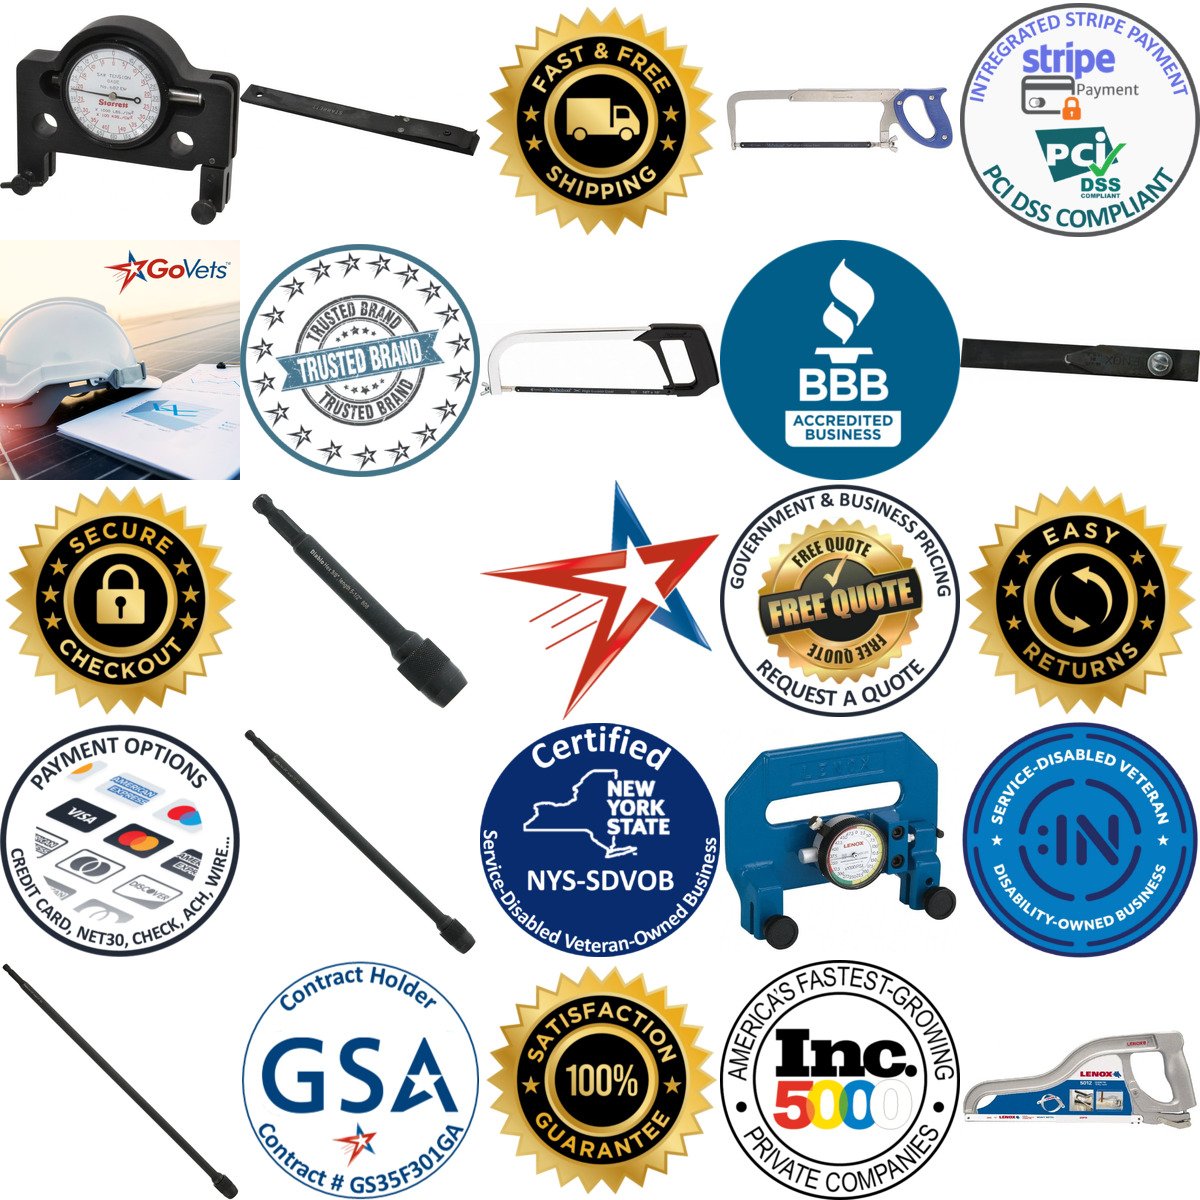 A selection of Saw Blade Accessories products on GoVets